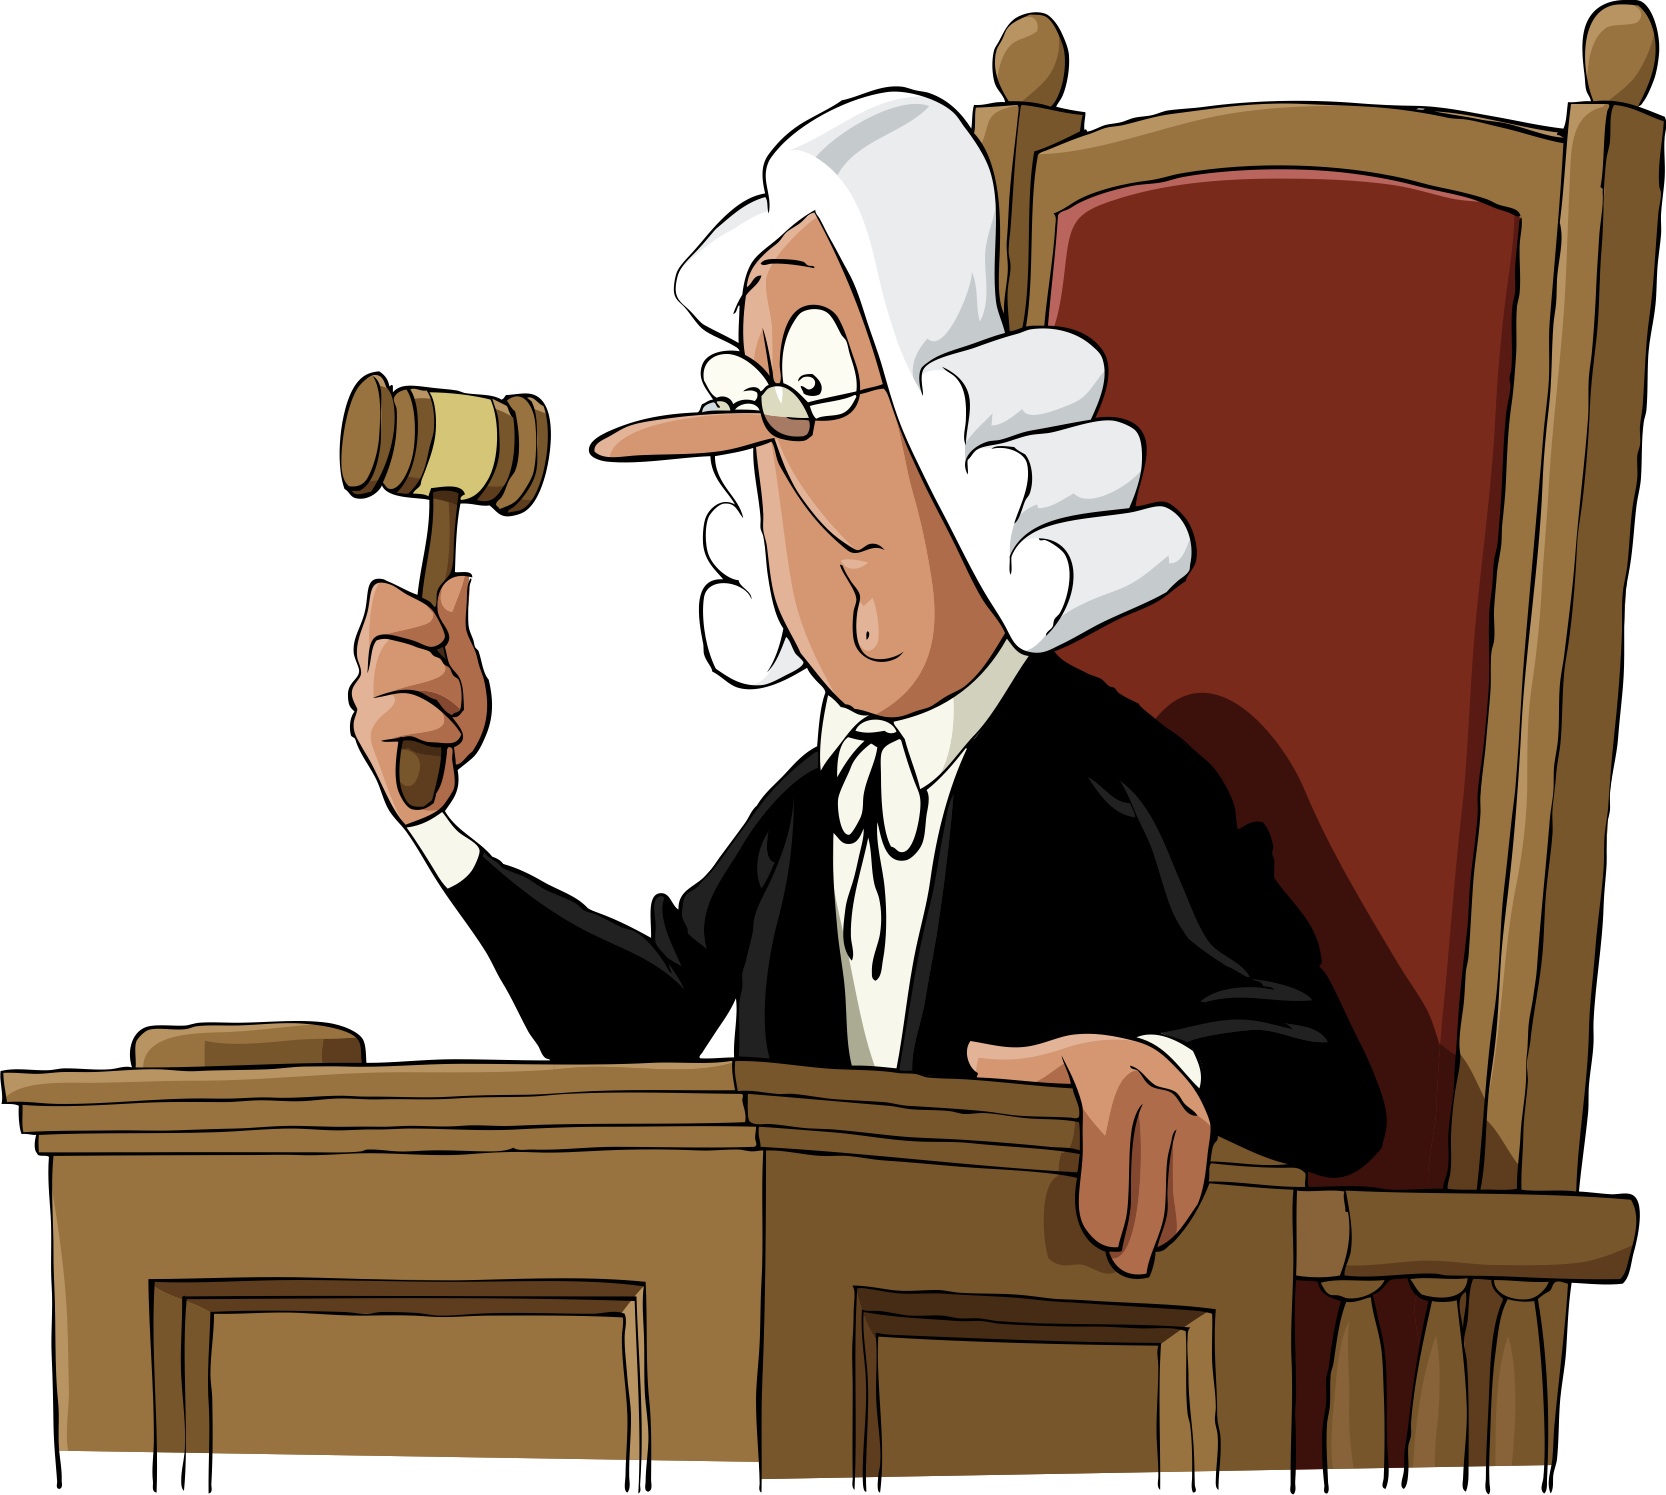 clipart of a judge - photo #26